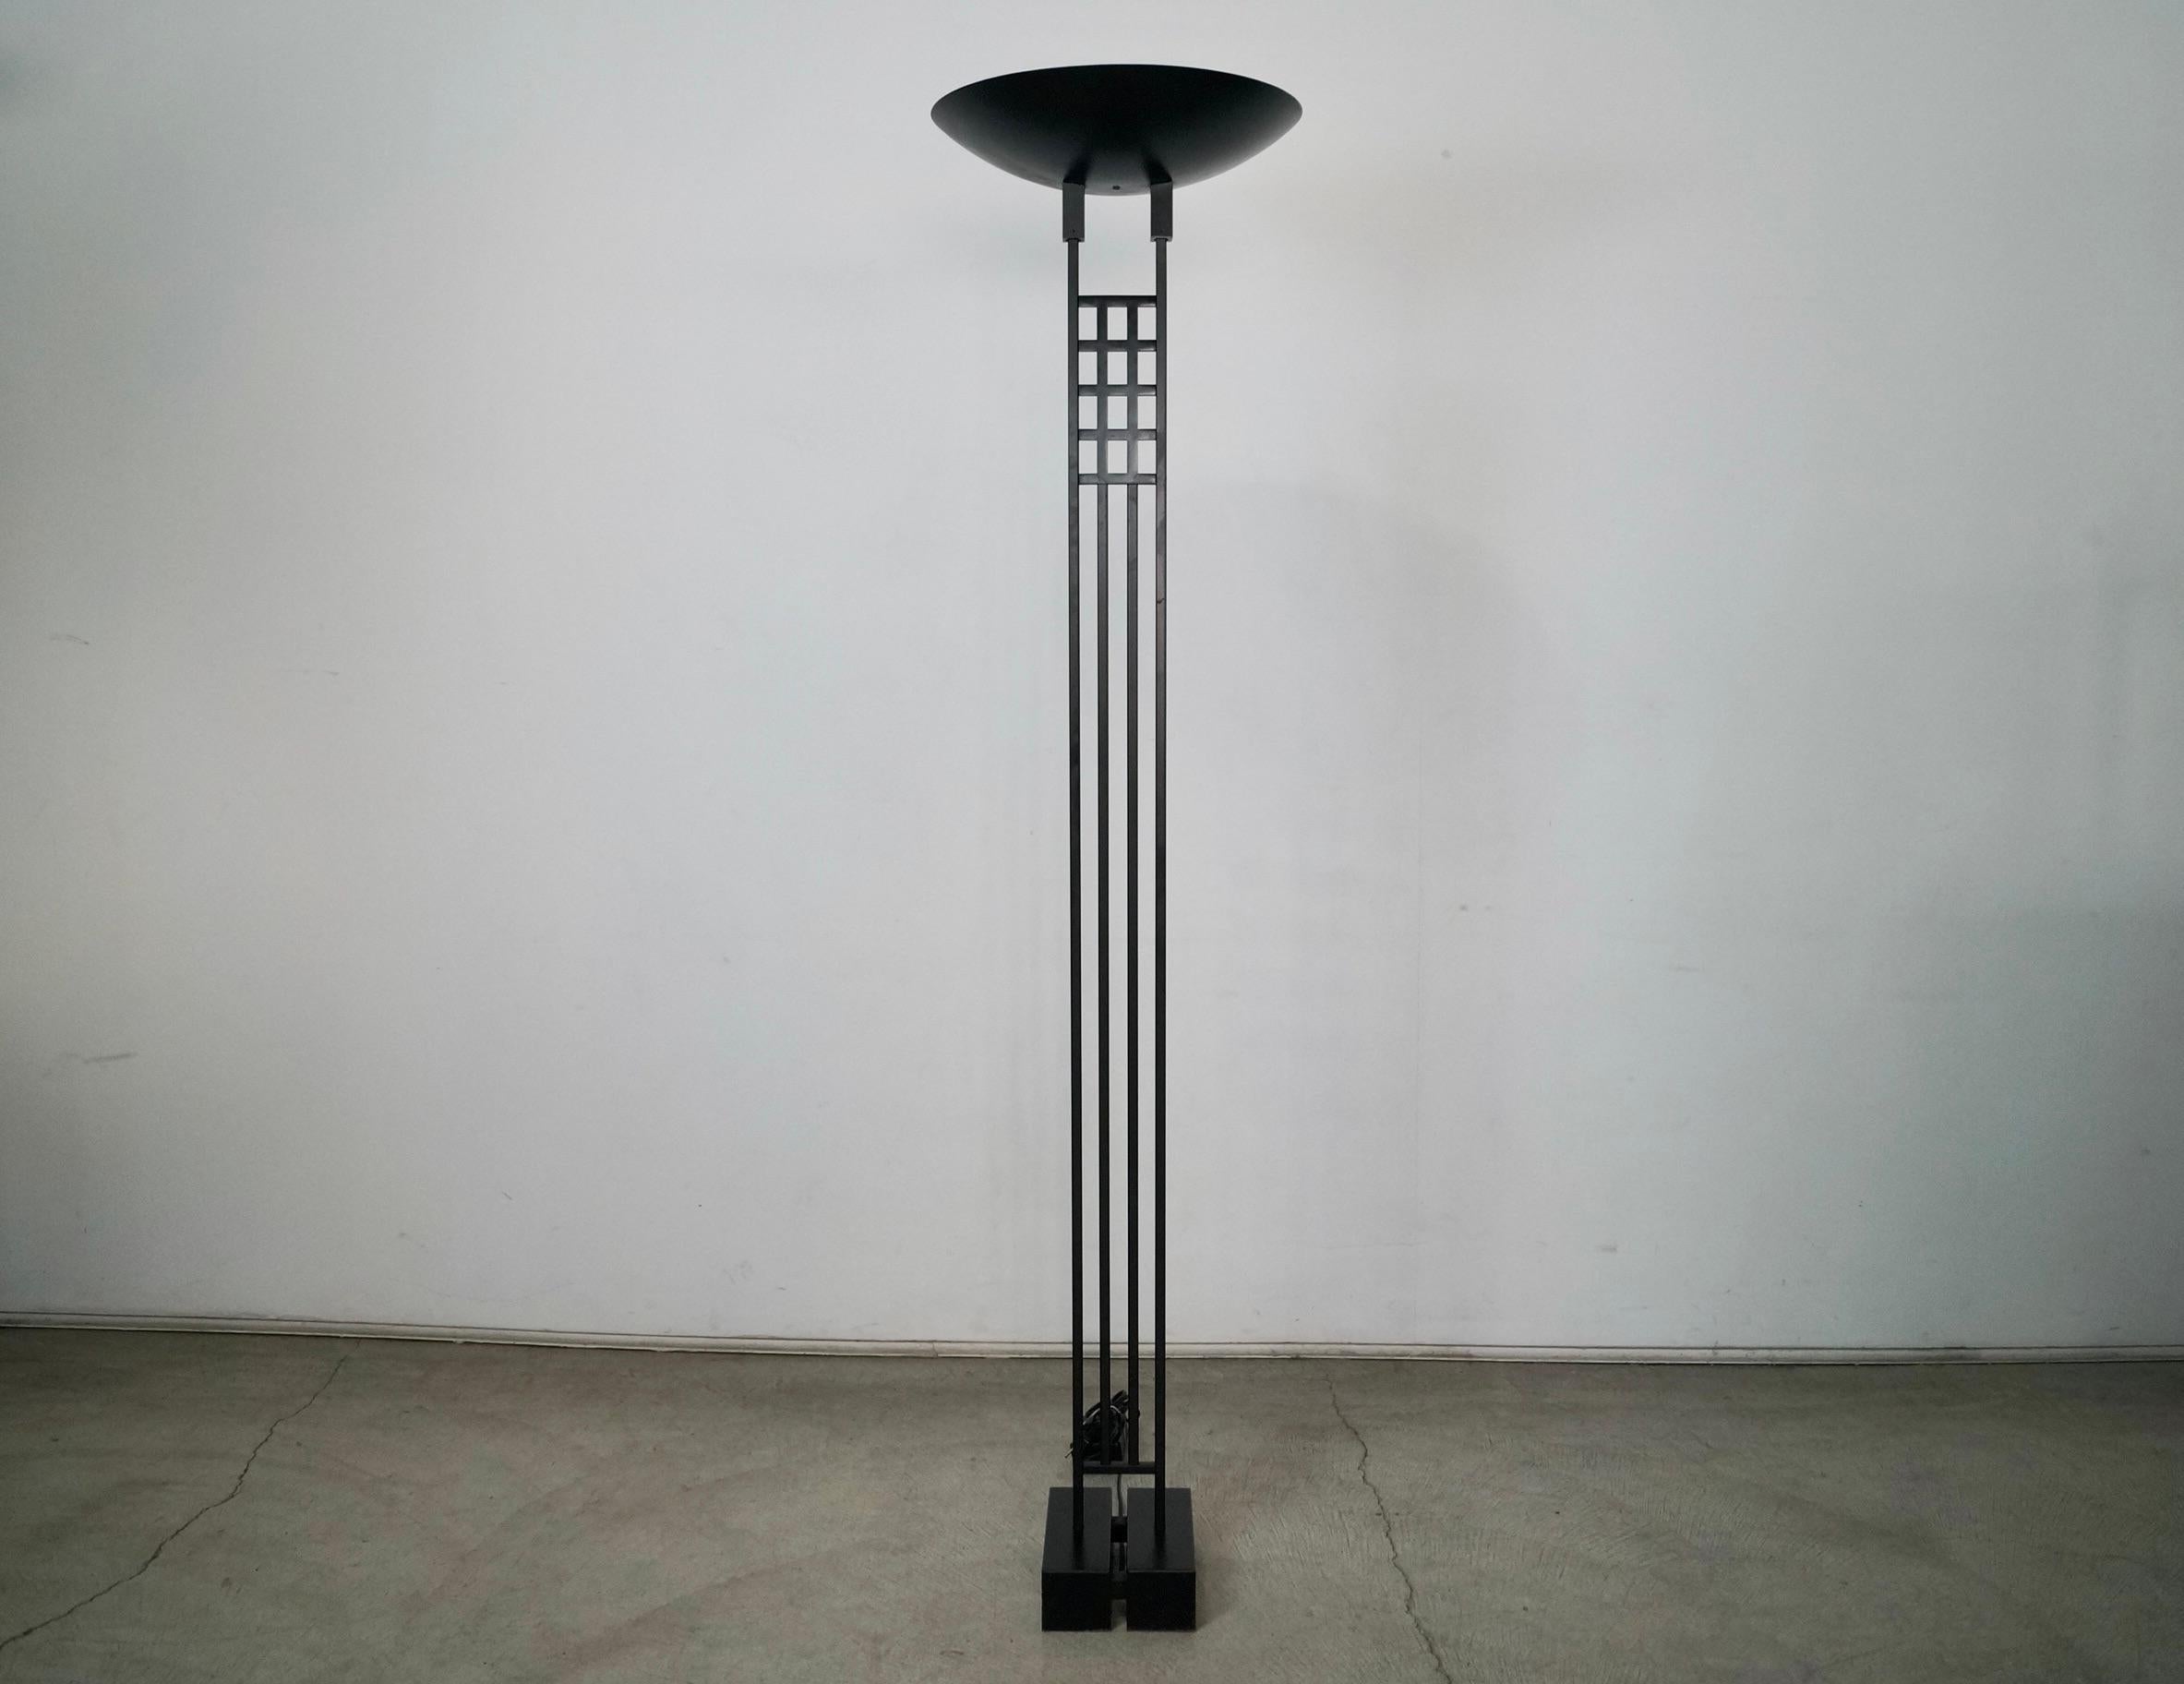 Vintage post modern floor lamp for sale. Designed by Robert Sonneman for George Kovacs in the 1980's, and is very architectural. It's in excellent condition, and has a dimmer light switch. It has a halogen bulb, and is in great working order. It's a